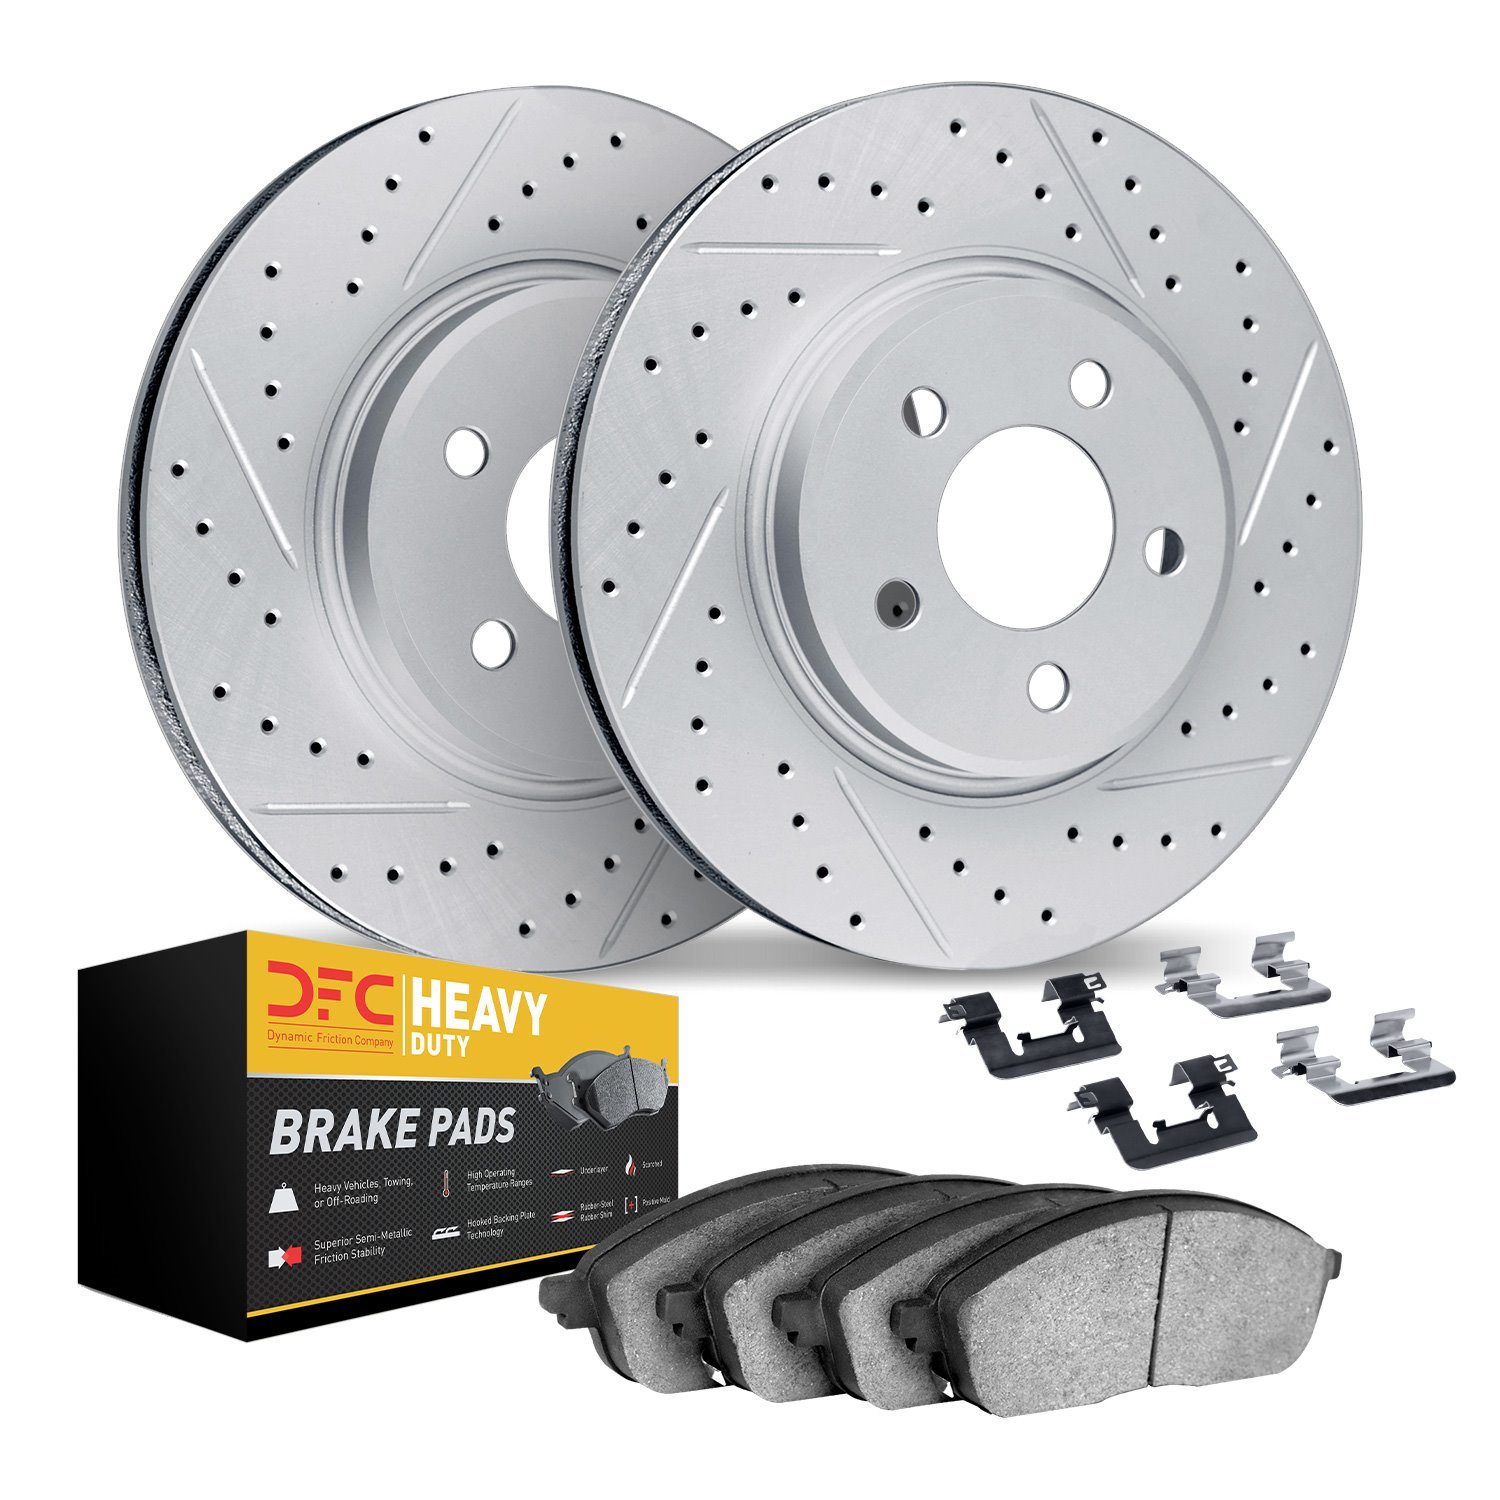 2212-54010 Geoperformance Drilled/Slotted Rotors w/Heavy-Duty Pads Kit & Hardware, 2006-2010 Ford/Lincoln/Mercury/Mazda, Positio